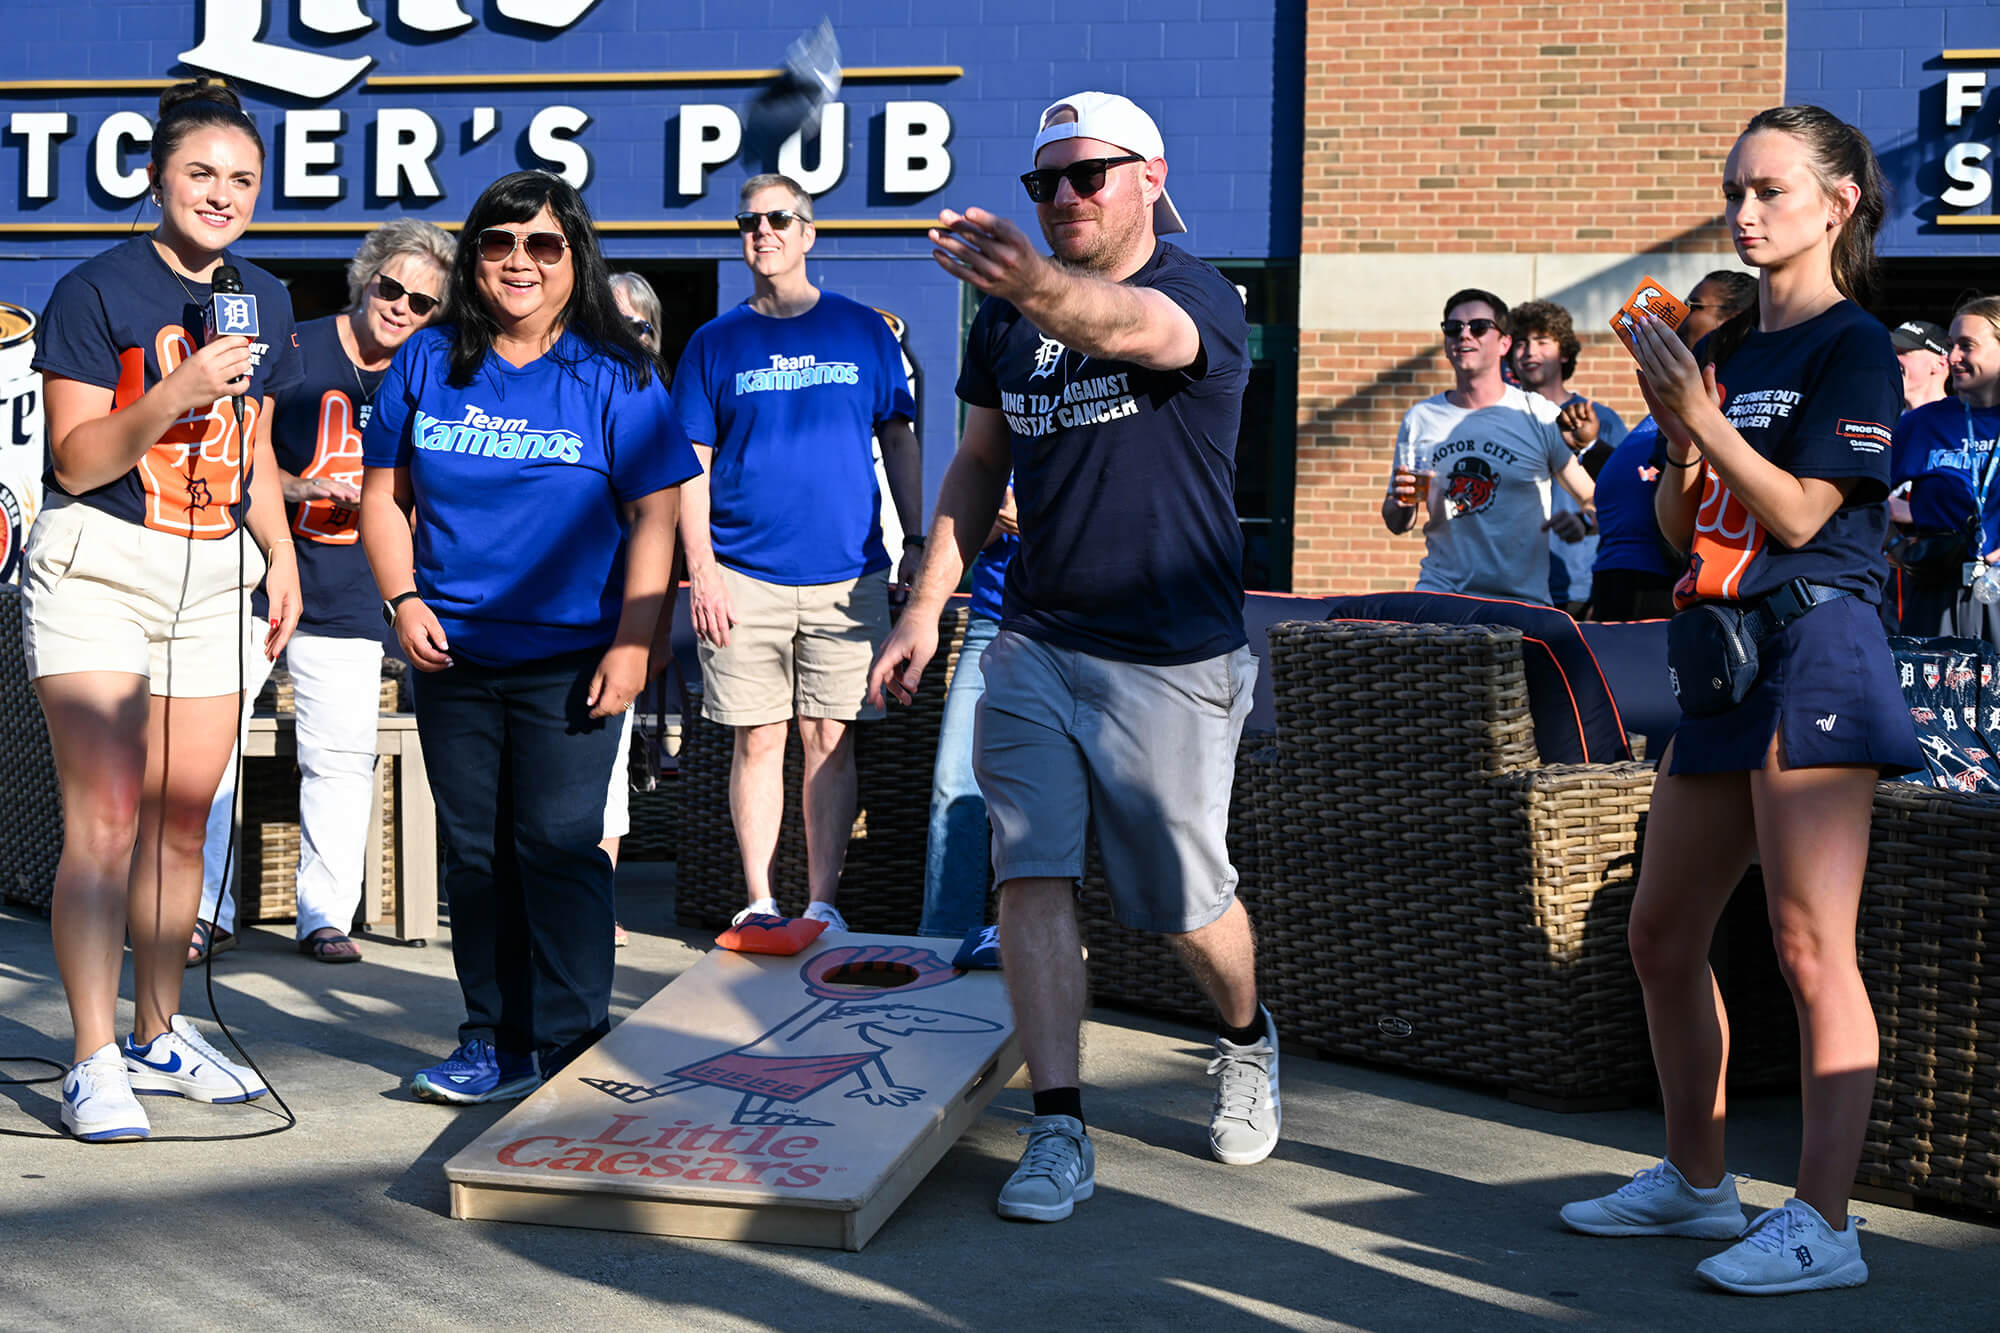 Elisabeth Heath, M.D., FACP, and Kevin Ginsburg, M.D., MS, played a friendly game of cornhole.